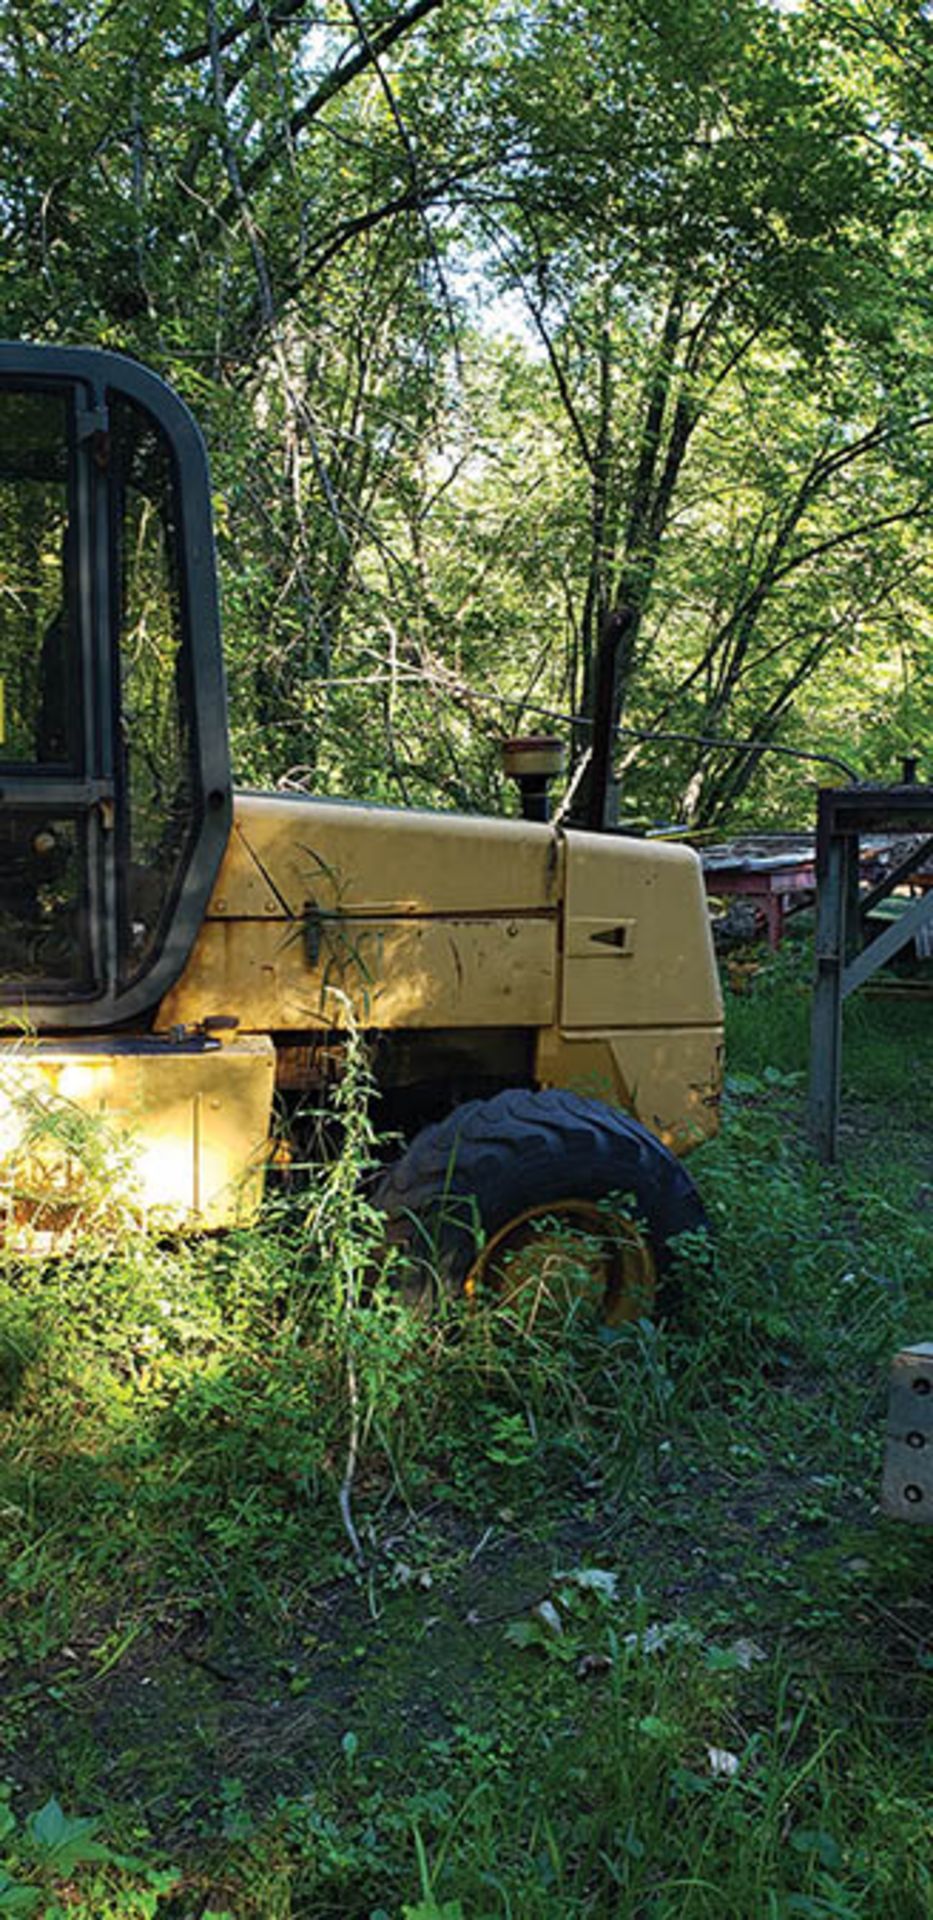 1992 JCB 8,000 LB. CAP. ALL-TERRAIN FORKLIFT, DIESEL, 4-WD. 3-STAGE MAST, CASCADE ROTARY ATTACHMENT, - Image 8 of 9